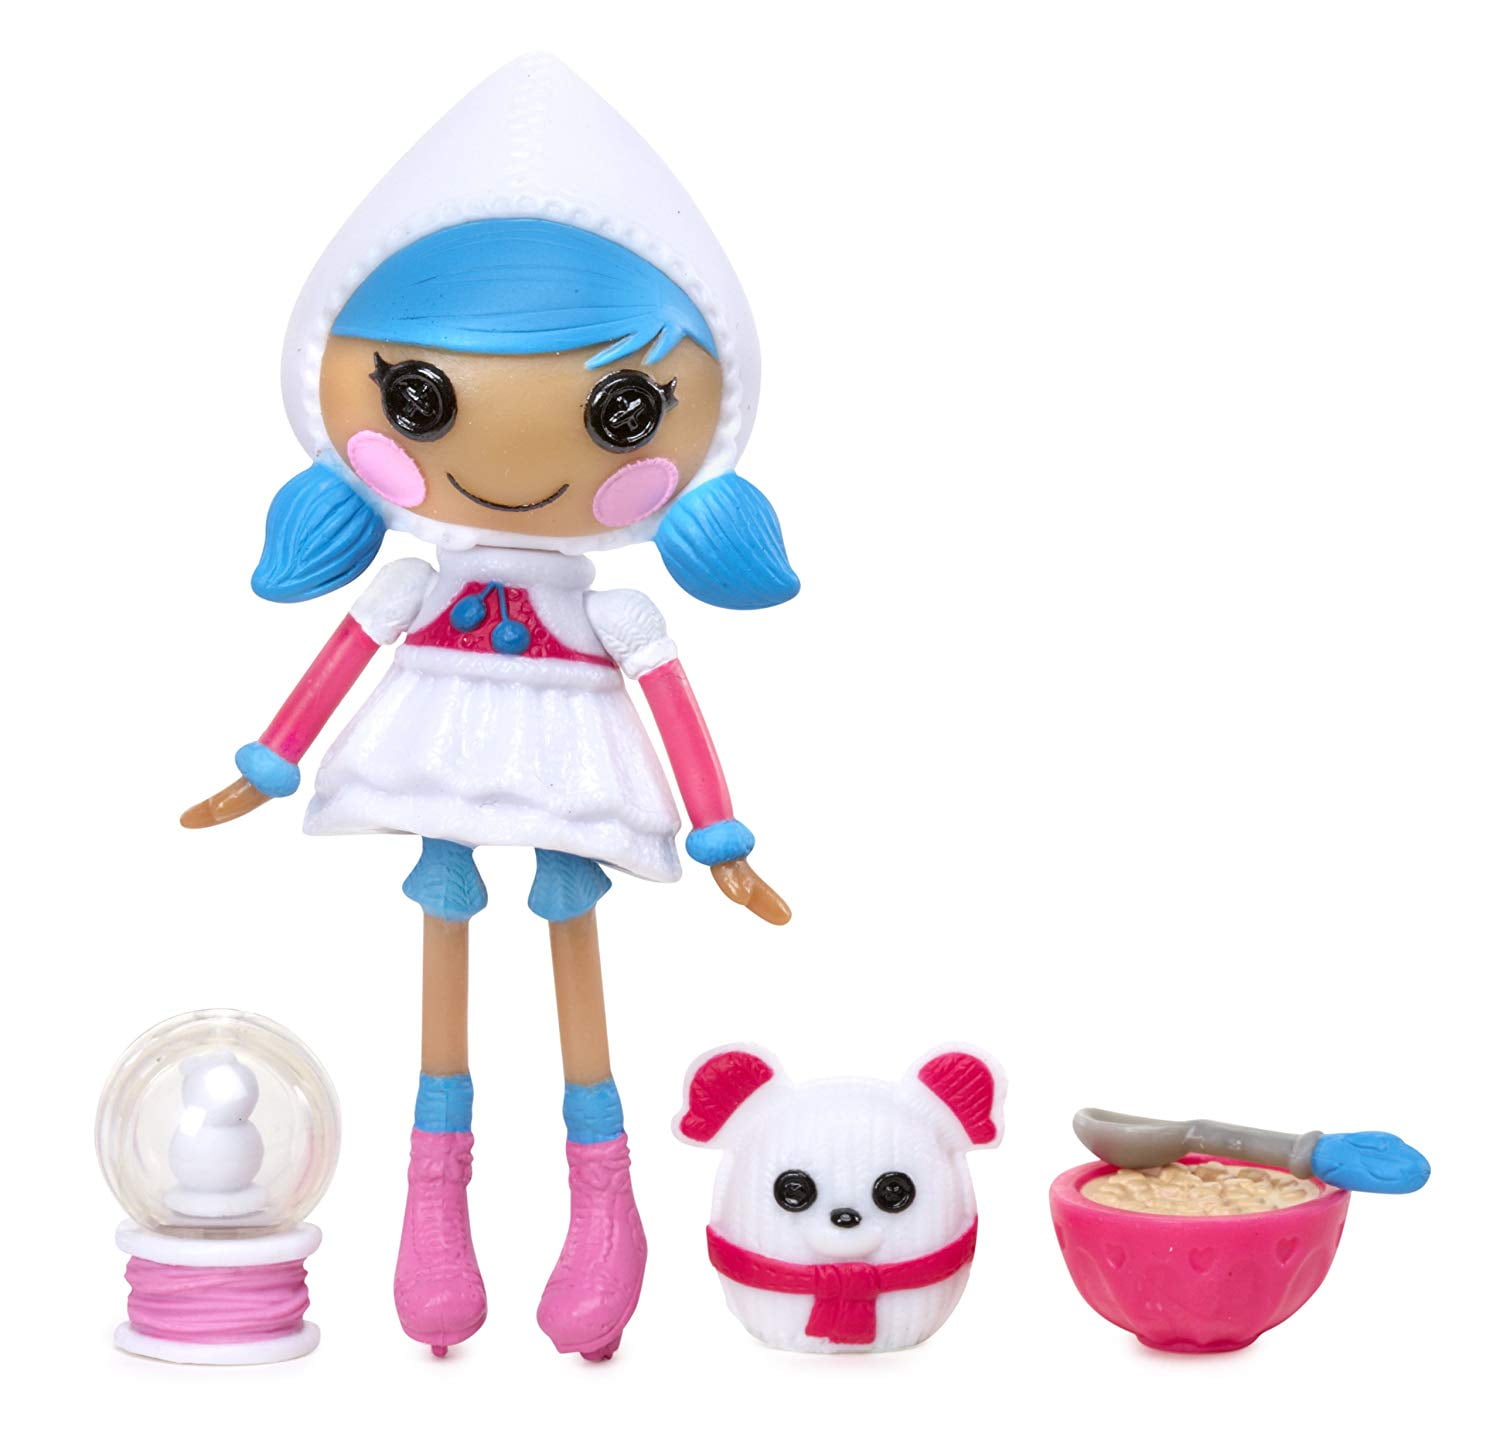 Mini Doll, Mittens Fluff-N-Stuff, Doll has movable arms, legs and head By Lalaloopsy